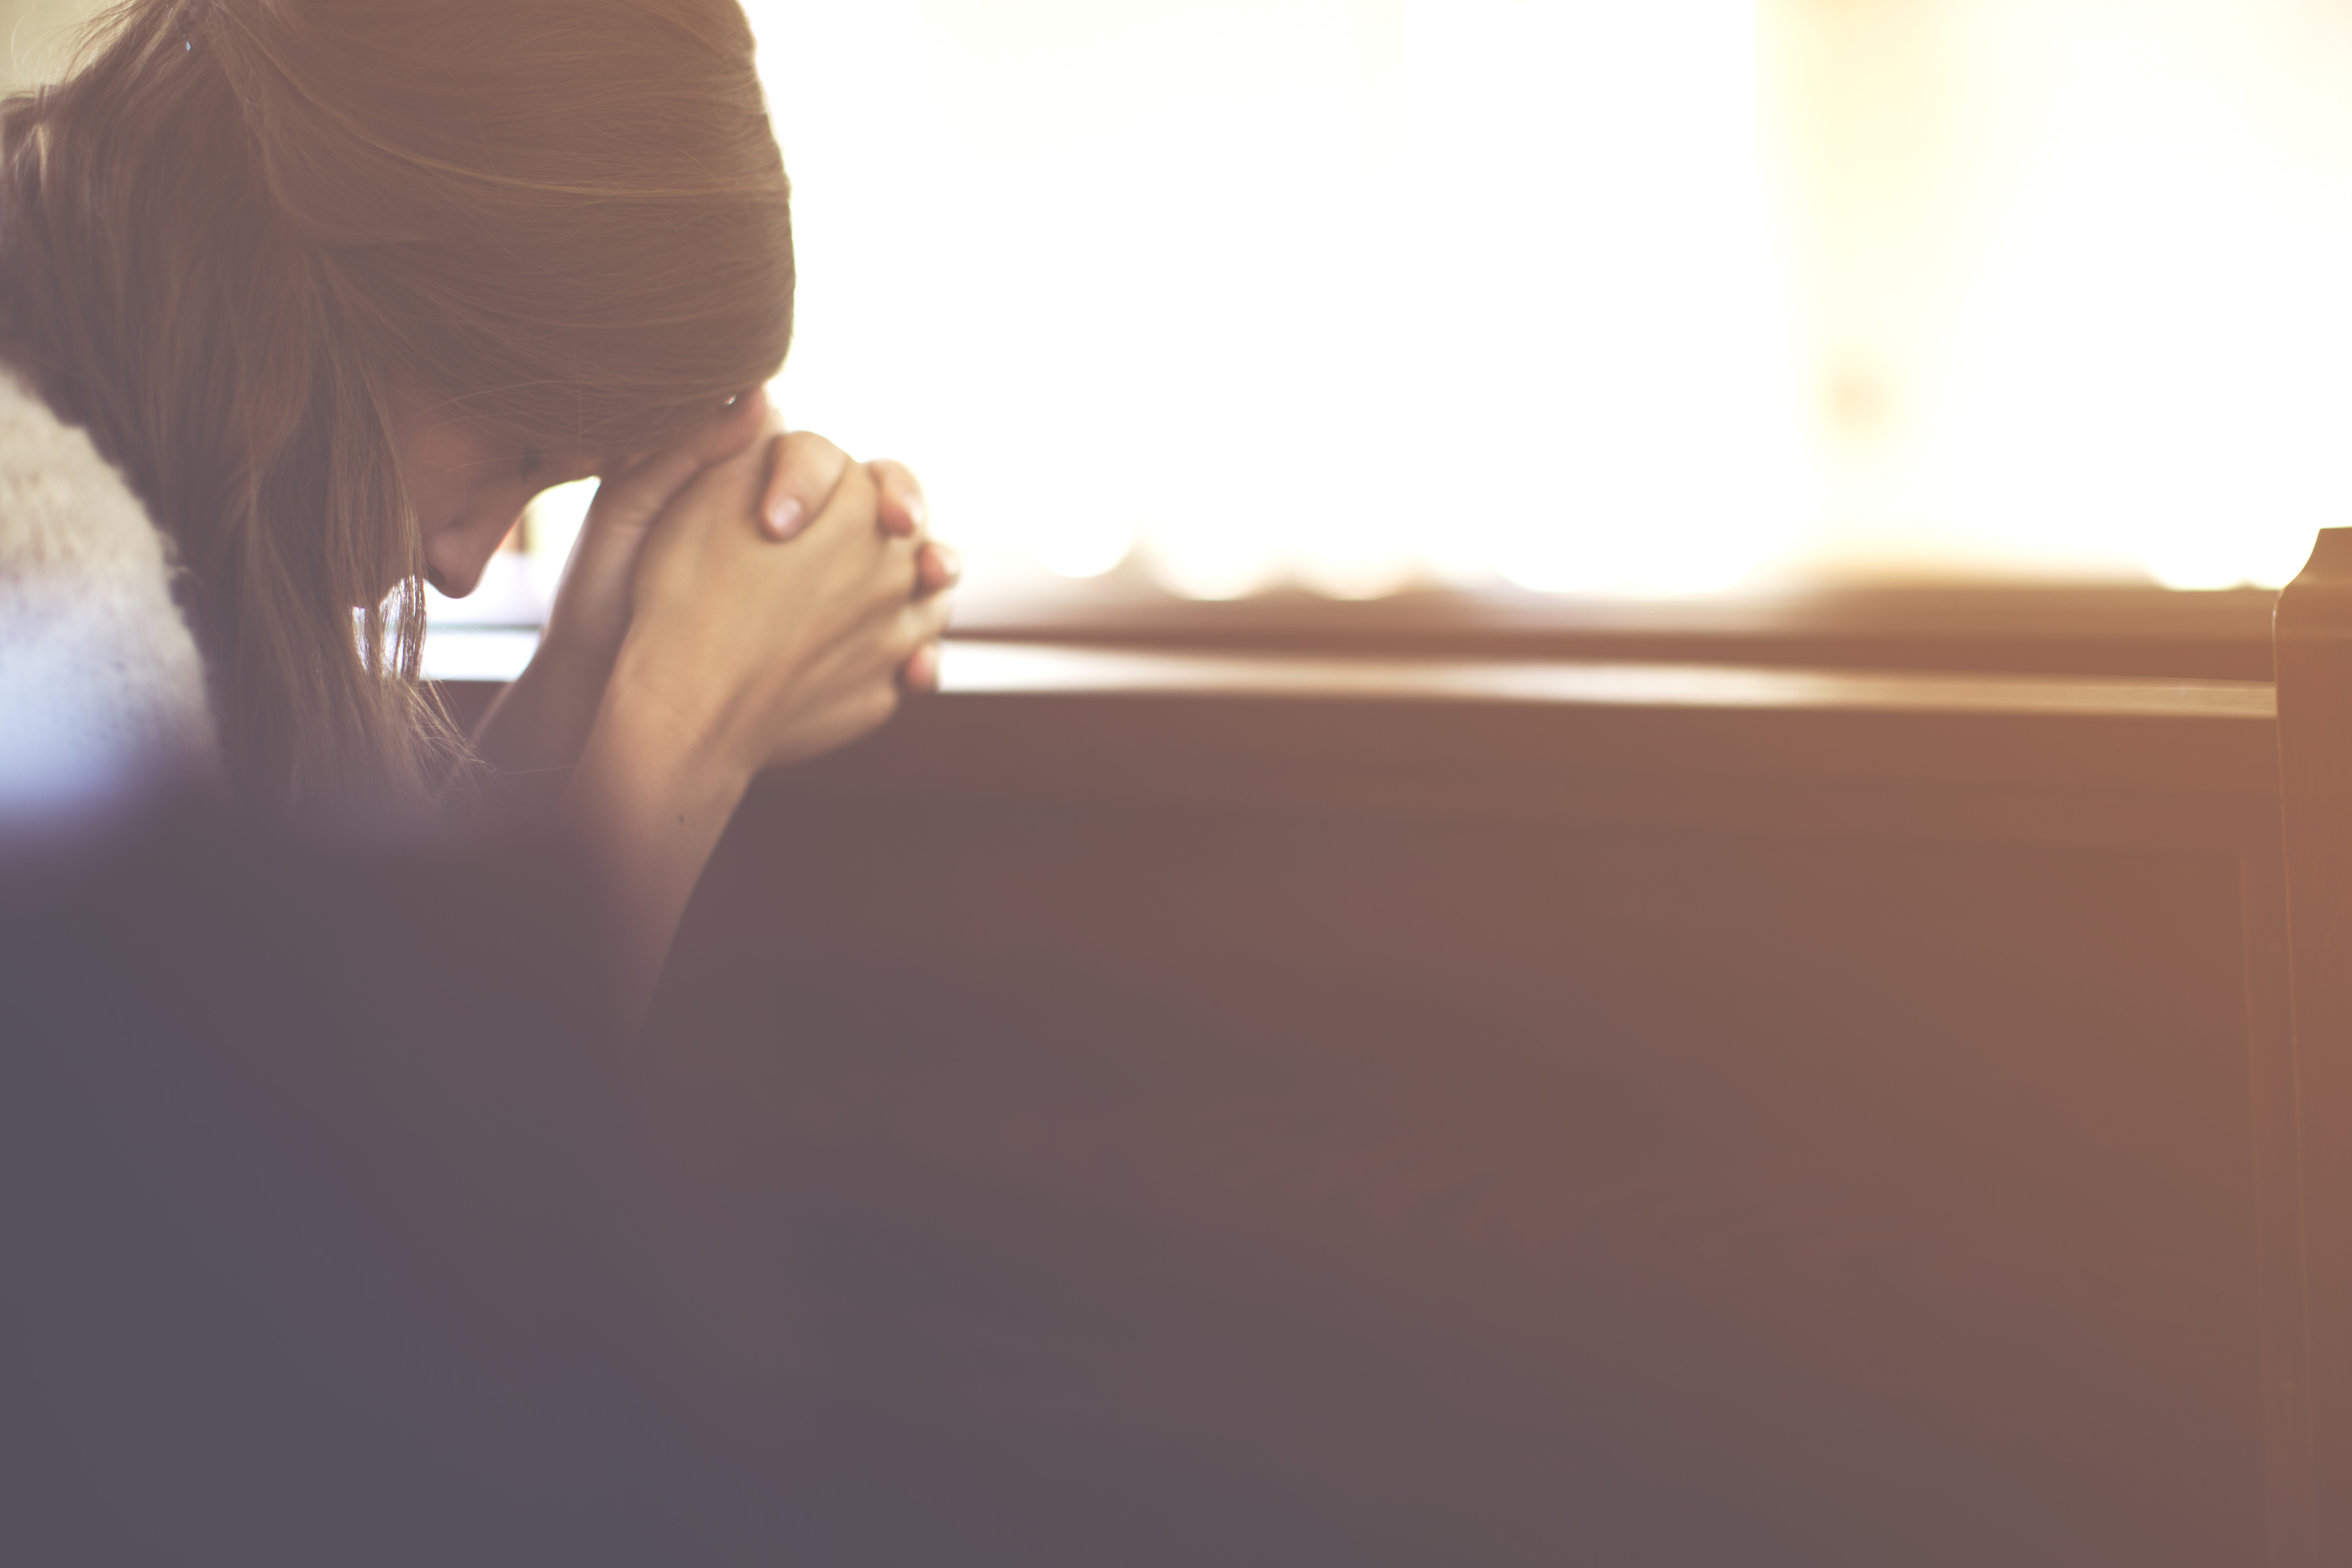 Why We Need to Pray Without Ceasing